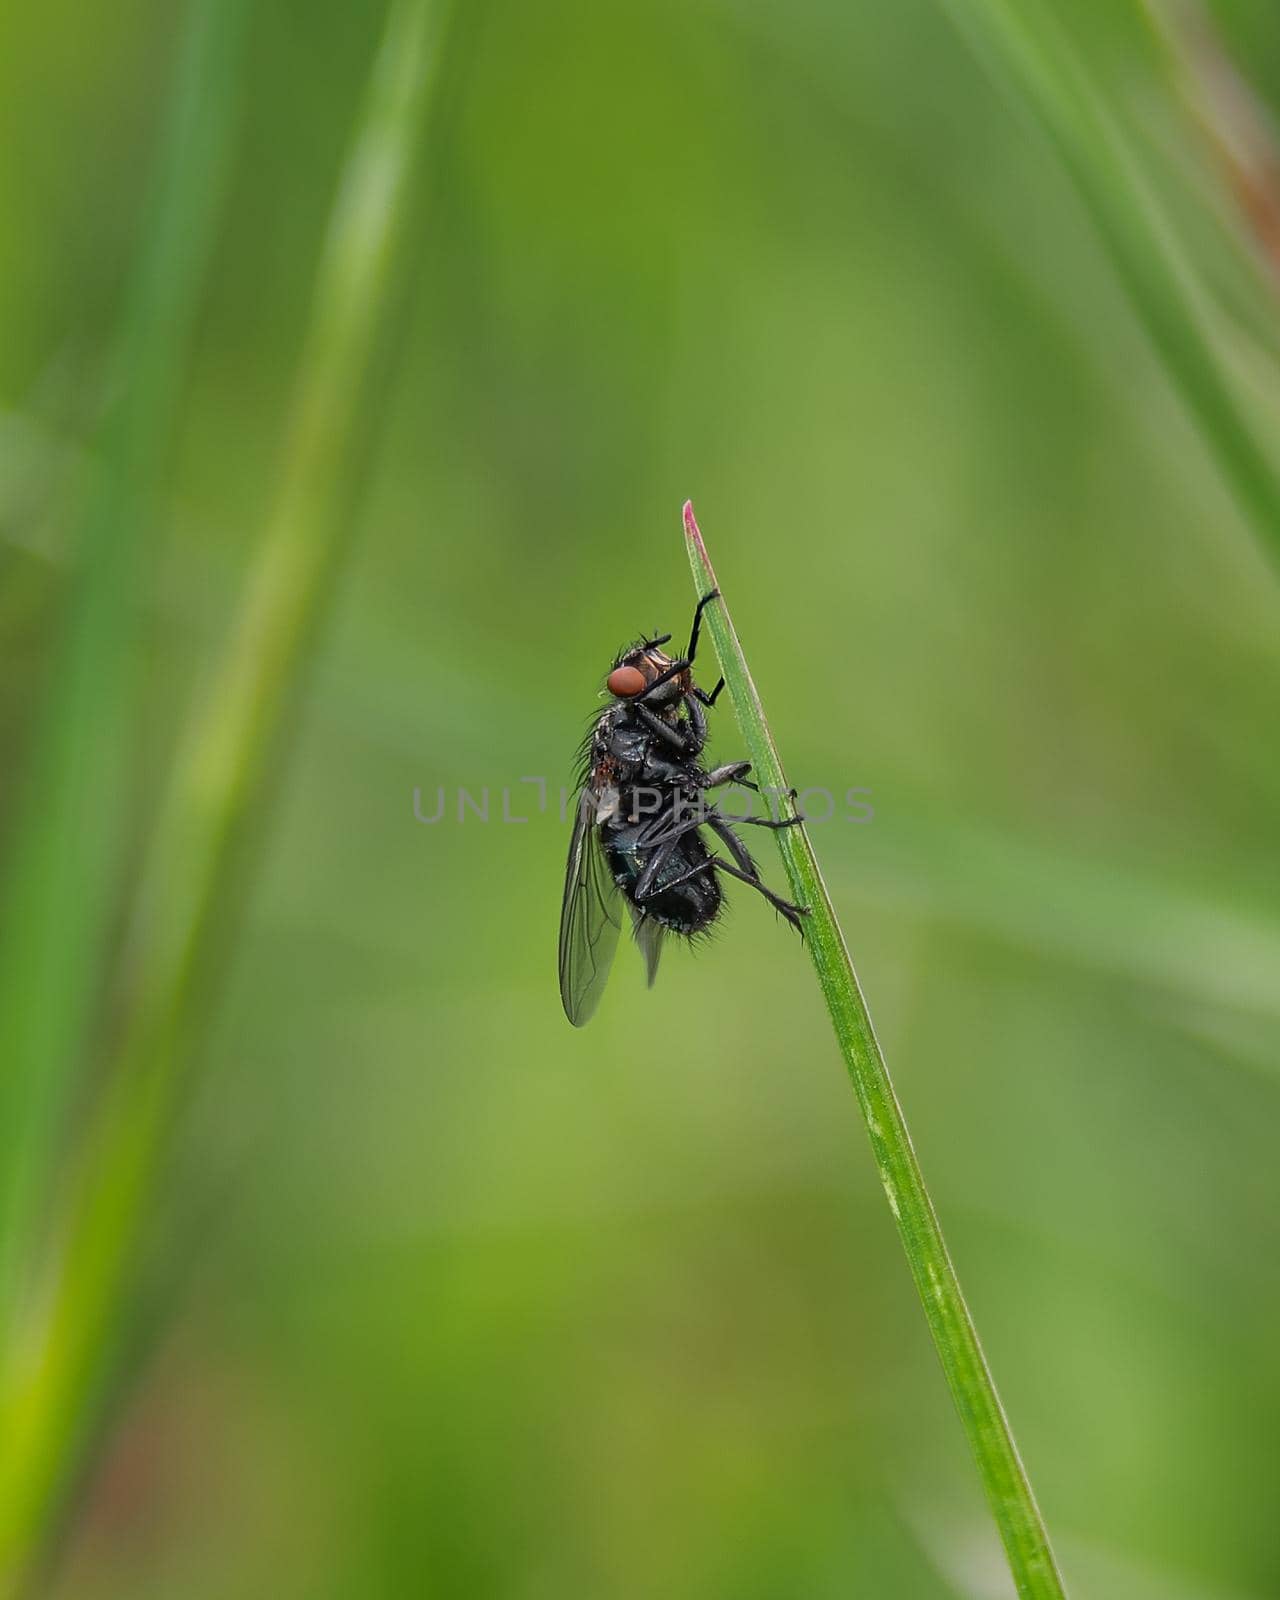 Macro photo of a fly, close-up photo of fly on green blurred background